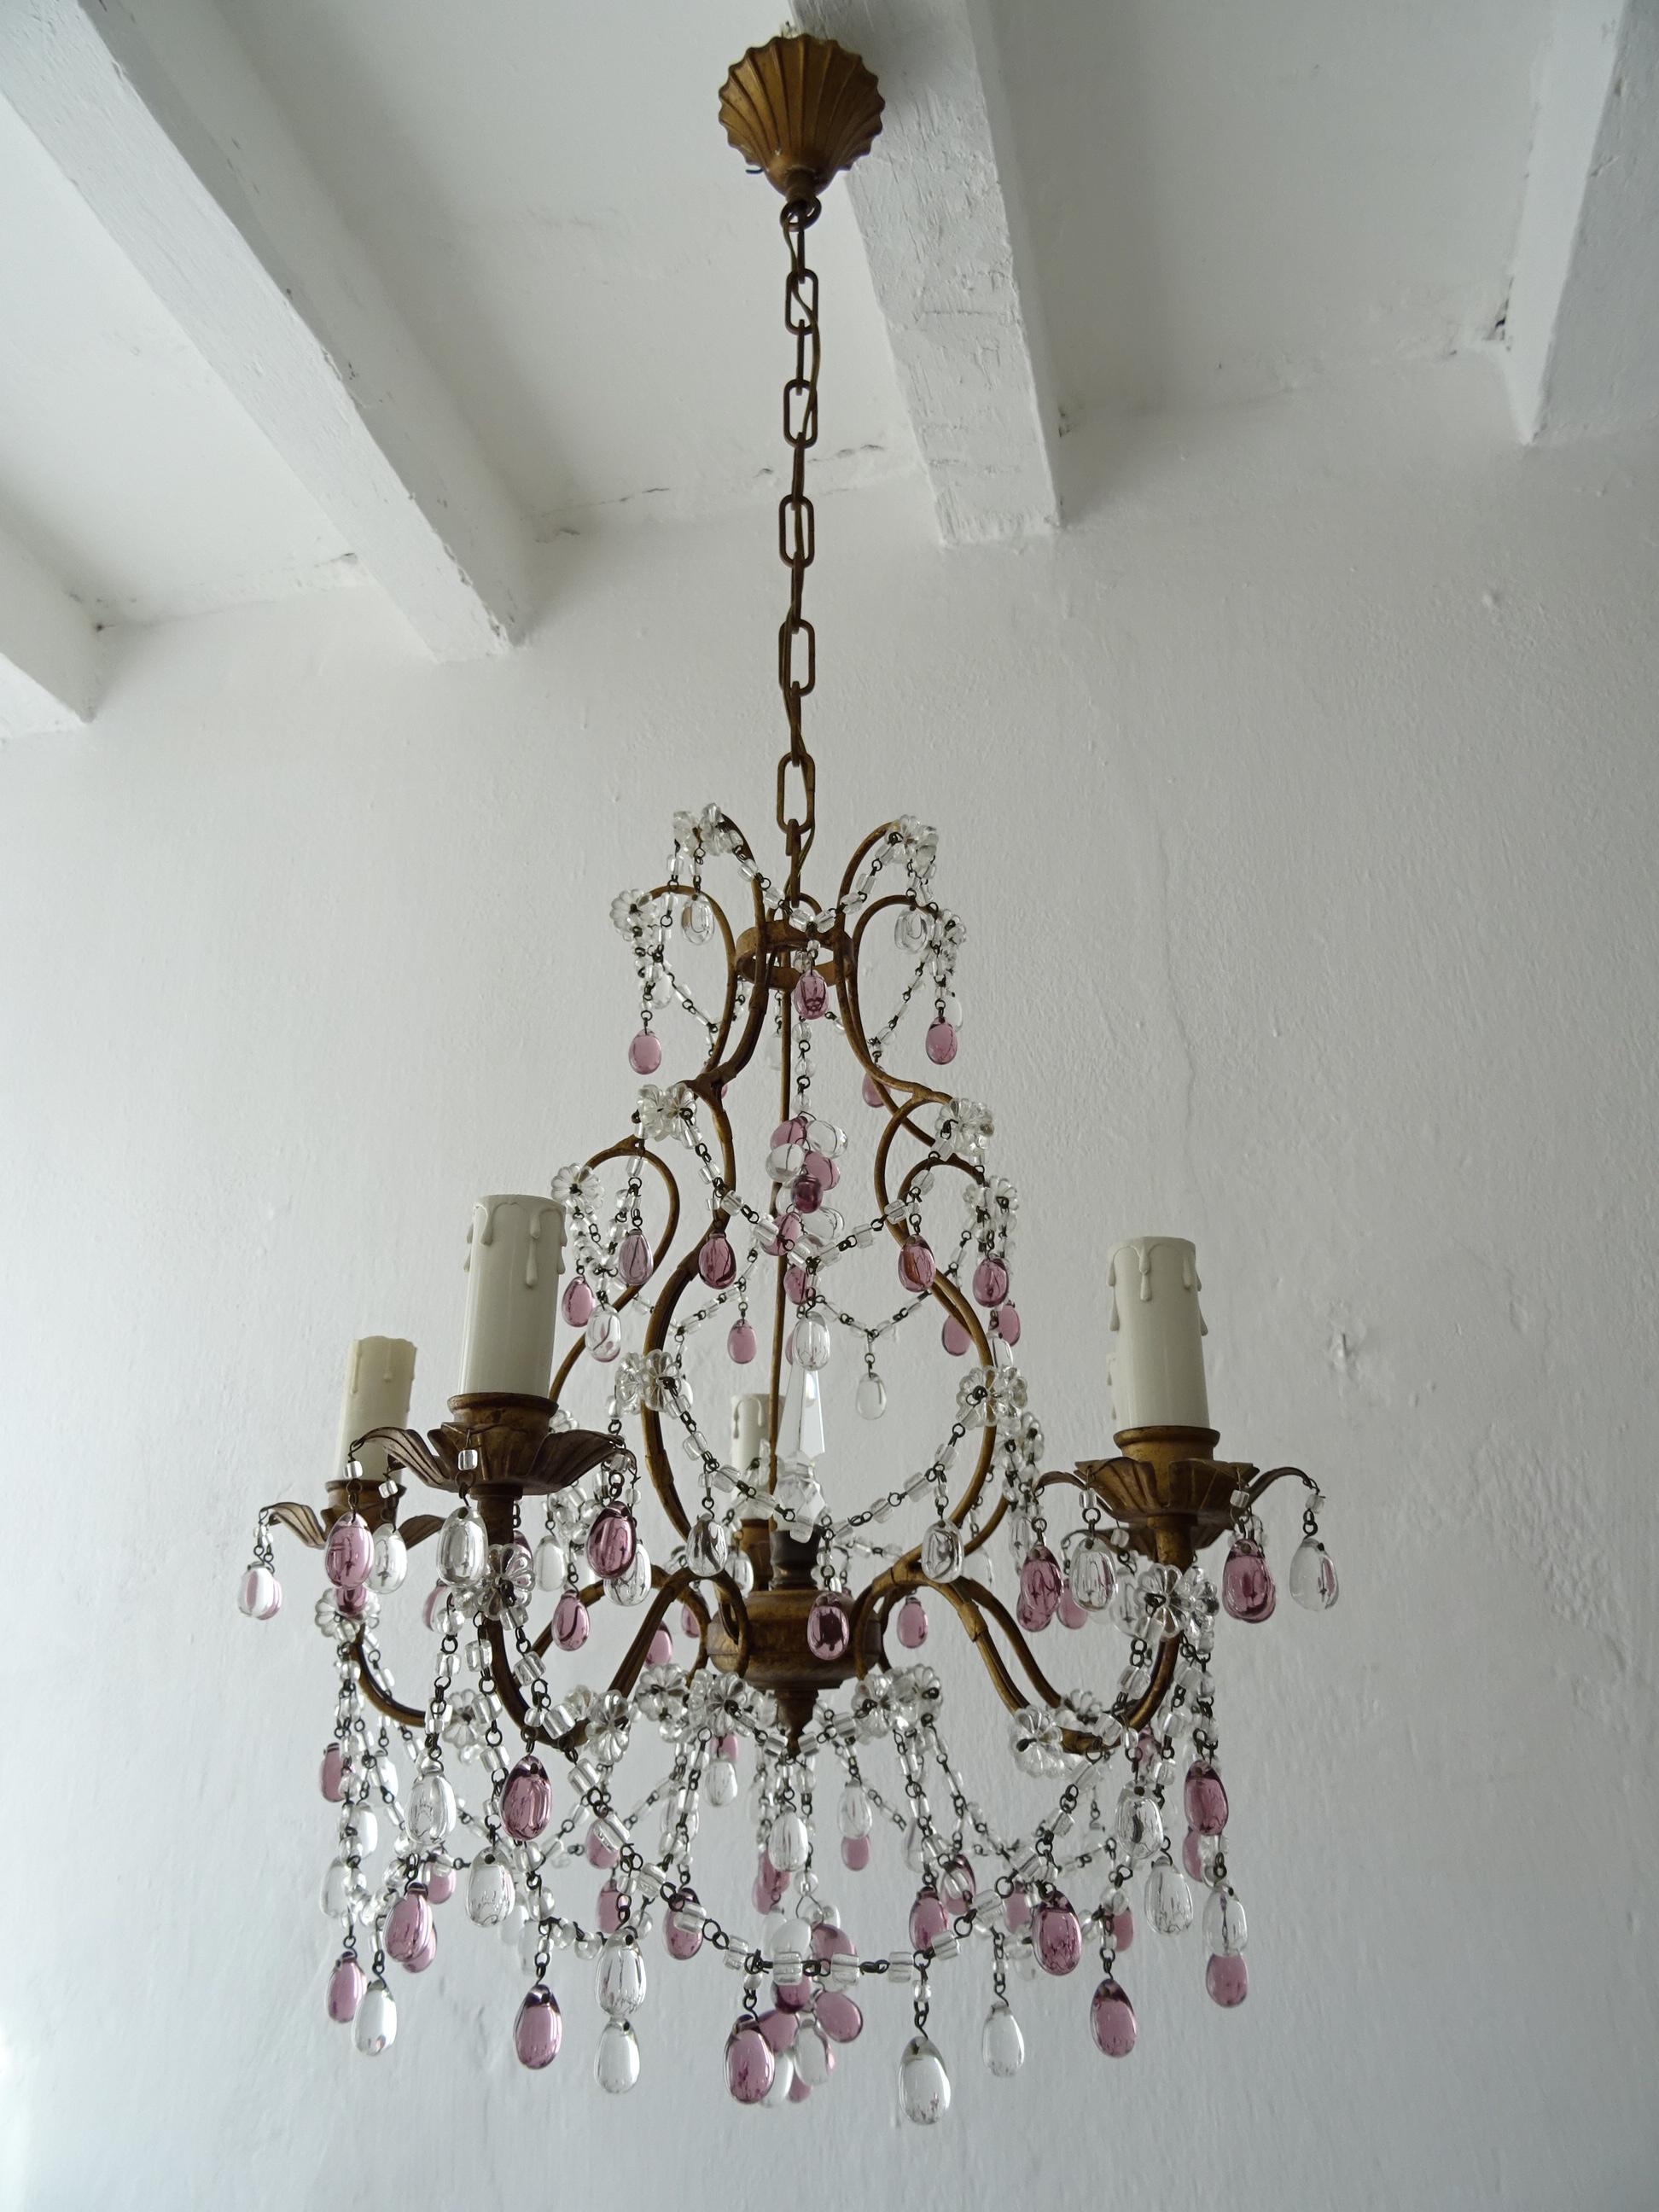 French Maison Baguès  Amethyst & Clear Murano Drops Chandelier, 1920s Signed In Good Condition For Sale In Firenze, Toscana